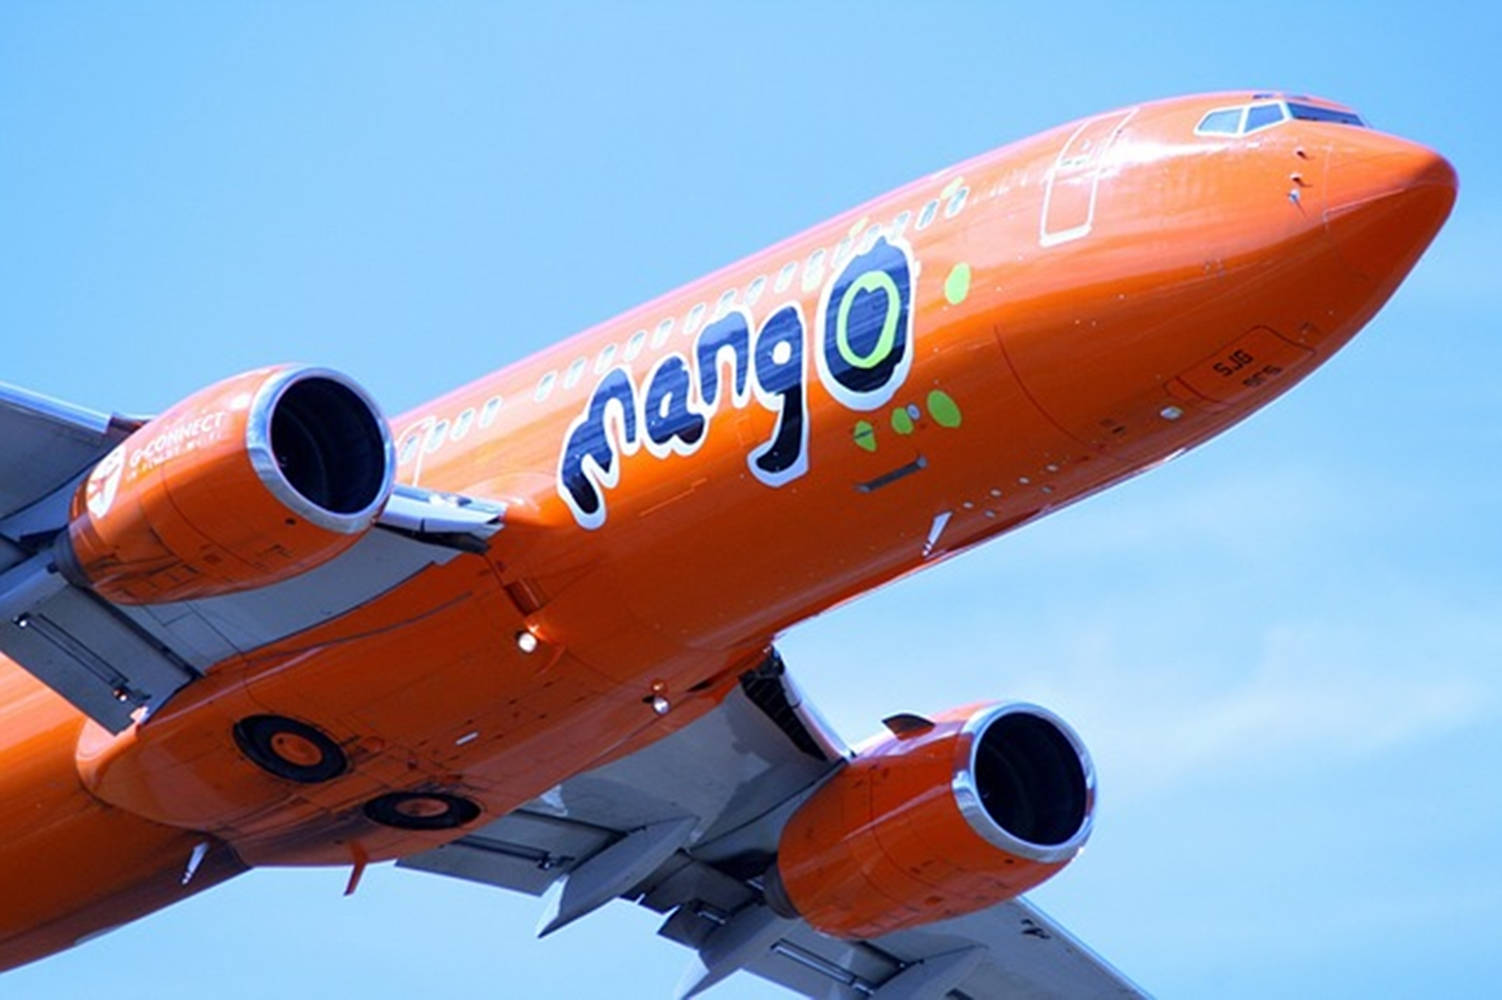 Mango Airlines Logo On Aircraft Background